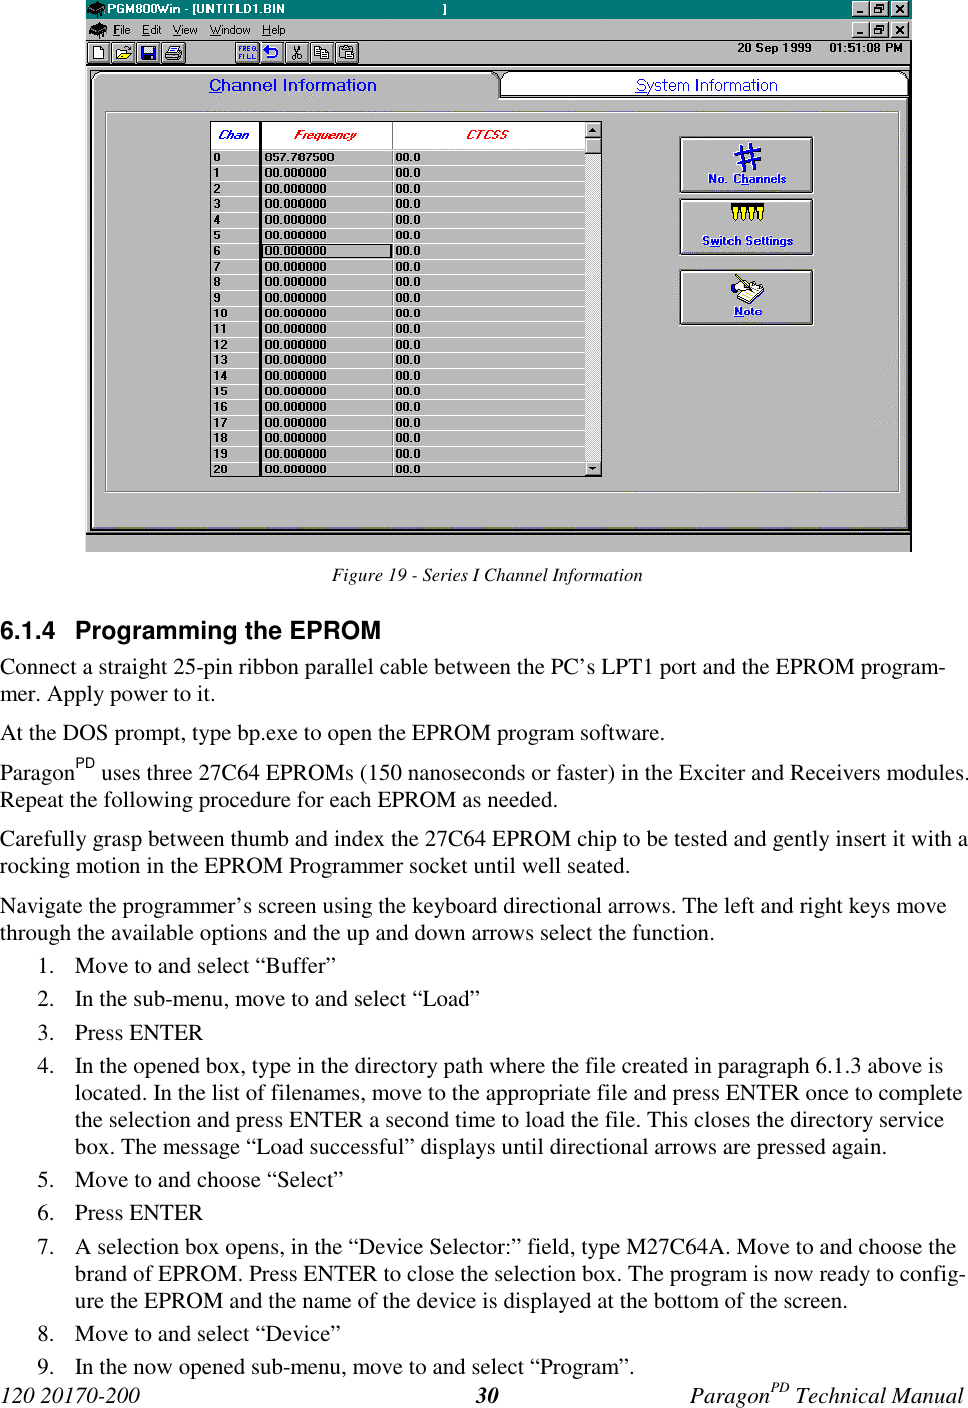 120 20170-200 ParagonPD Technical Manual30Figure 19 - Series I Channel Information6.1.4  Programming the EPROMConnect a straight 25-pin ribbon parallel cable between the PC’s LPT1 port and the EPROM program-mer. Apply power to it.At the DOS prompt, type bp.exe to open the EPROM program software.ParagonPD uses three 27C64 EPROMs (150 nanoseconds or faster) in the Exciter and Receivers modules.Repeat the following procedure for each EPROM as needed.Carefully grasp between thumb and index the 27C64 EPROM chip to be tested and gently insert it with arocking motion in the EPROM Programmer socket until well seated.Navigate the programmer’s screen using the keyboard directional arrows. The left and right keys movethrough the available options and the up and down arrows select the function.1. Move to and select “Buffer”2. In the sub-menu, move to and select “Load”3. Press ENTER4. In the opened box, type in the directory path where the file created in paragraph 6.1.3 above islocated. In the list of filenames, move to the appropriate file and press ENTER once to completethe selection and press ENTER a second time to load the file. This closes the directory servicebox. The message “Load successful” displays until directional arrows are pressed again.5. Move to and choose “Select”6. Press ENTER7. A selection box opens, in the “Device Selector:” field, type M27C64A. Move to and choose thebrand of EPROM. Press ENTER to close the selection box. The program is now ready to config-ure the EPROM and the name of the device is displayed at the bottom of the screen.8. Move to and select “Device”9. In the now opened sub-menu, move to and select “Program”.